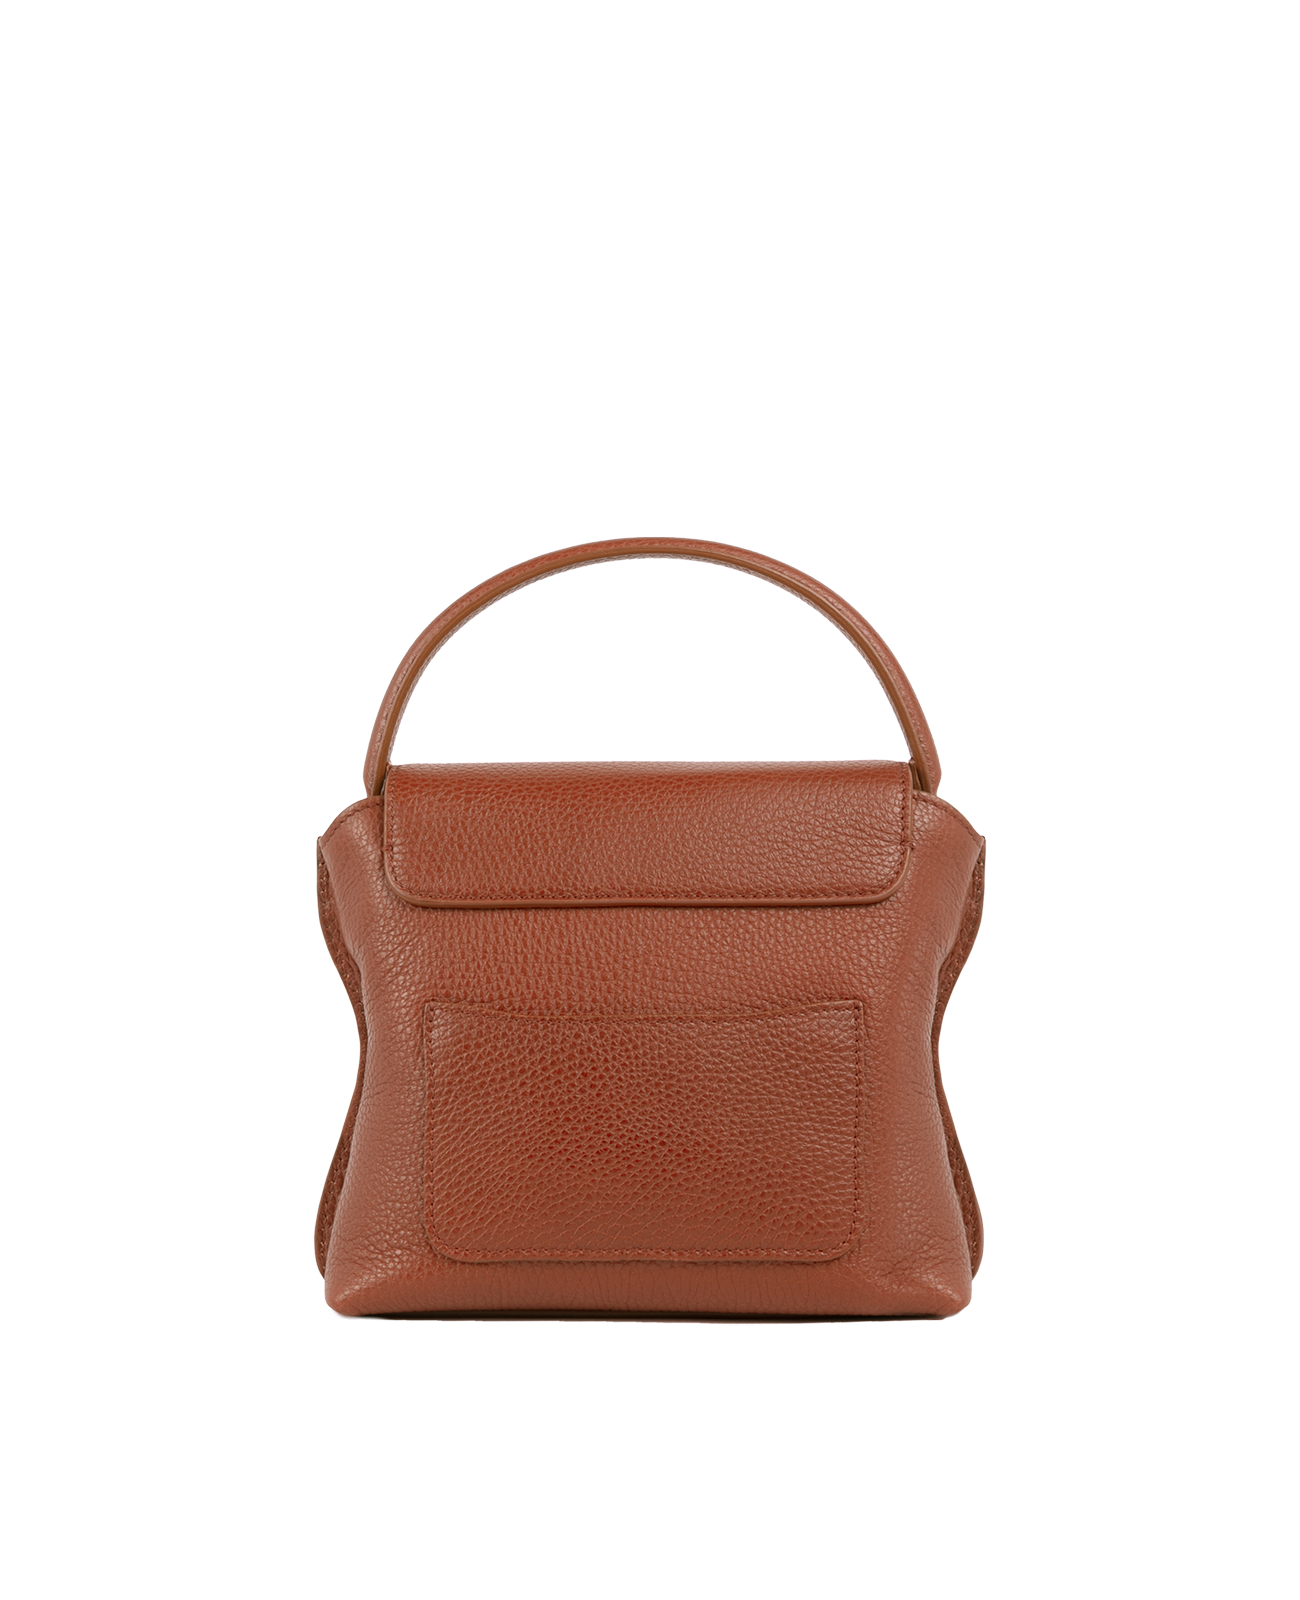 Cross-body bag in Italian full-grain leather, semi-aniline calf Italian leather with detachable shoulder strap.Three compartments, zip pocket in the back compartment. Magnetic flap closure with logo. Color: Brown. Size:Medium